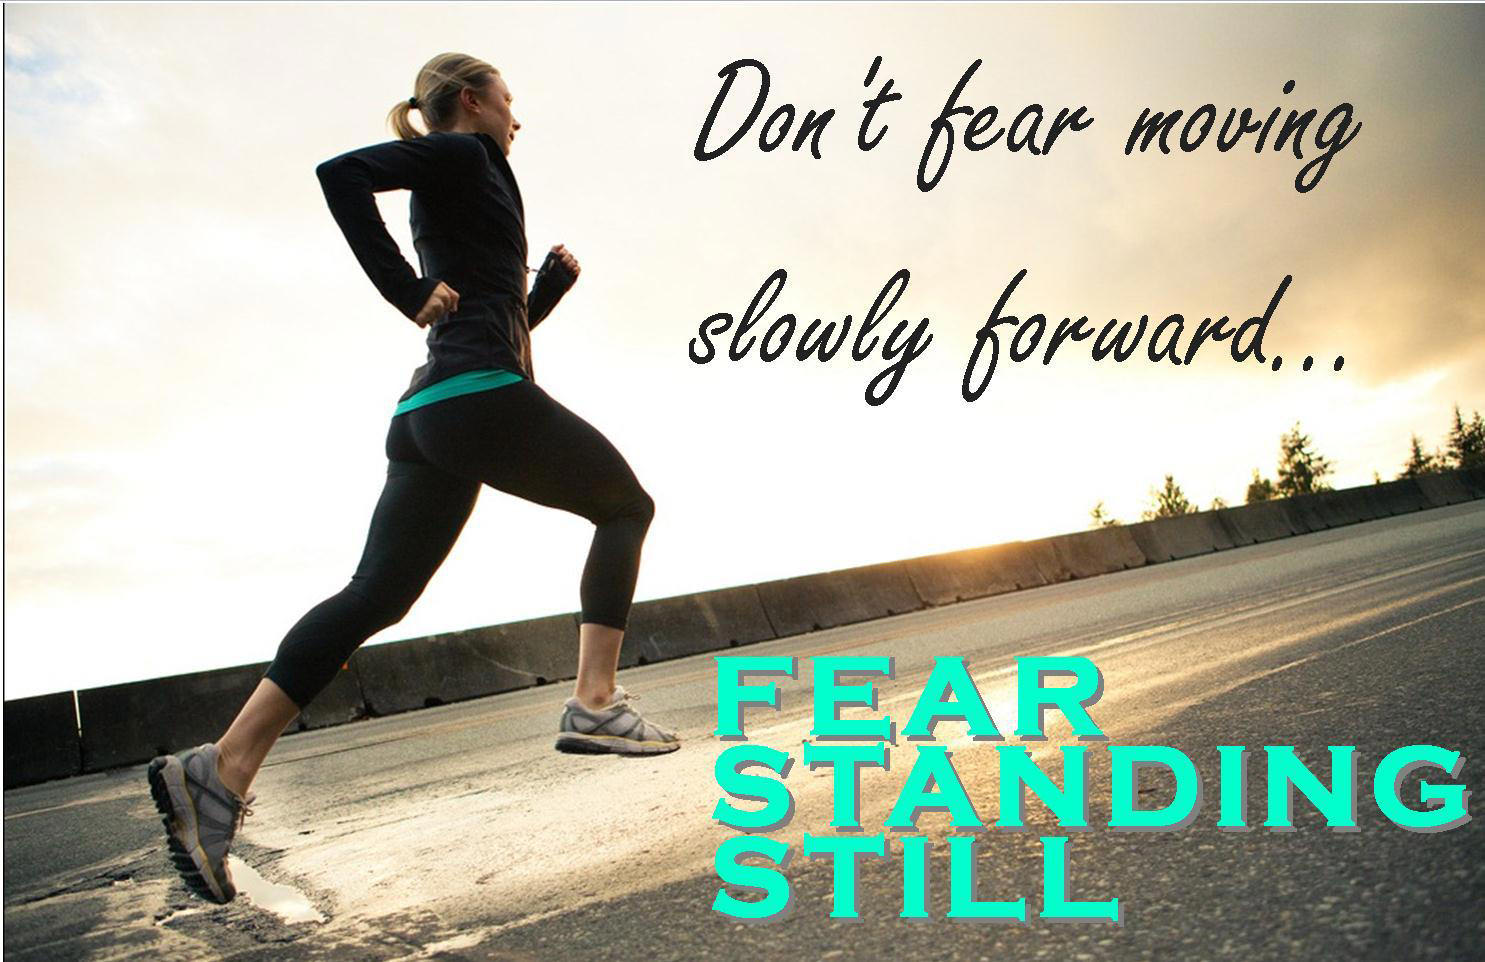 Runner Things #276: Don't fear moving slowly forward. Fear standing still.